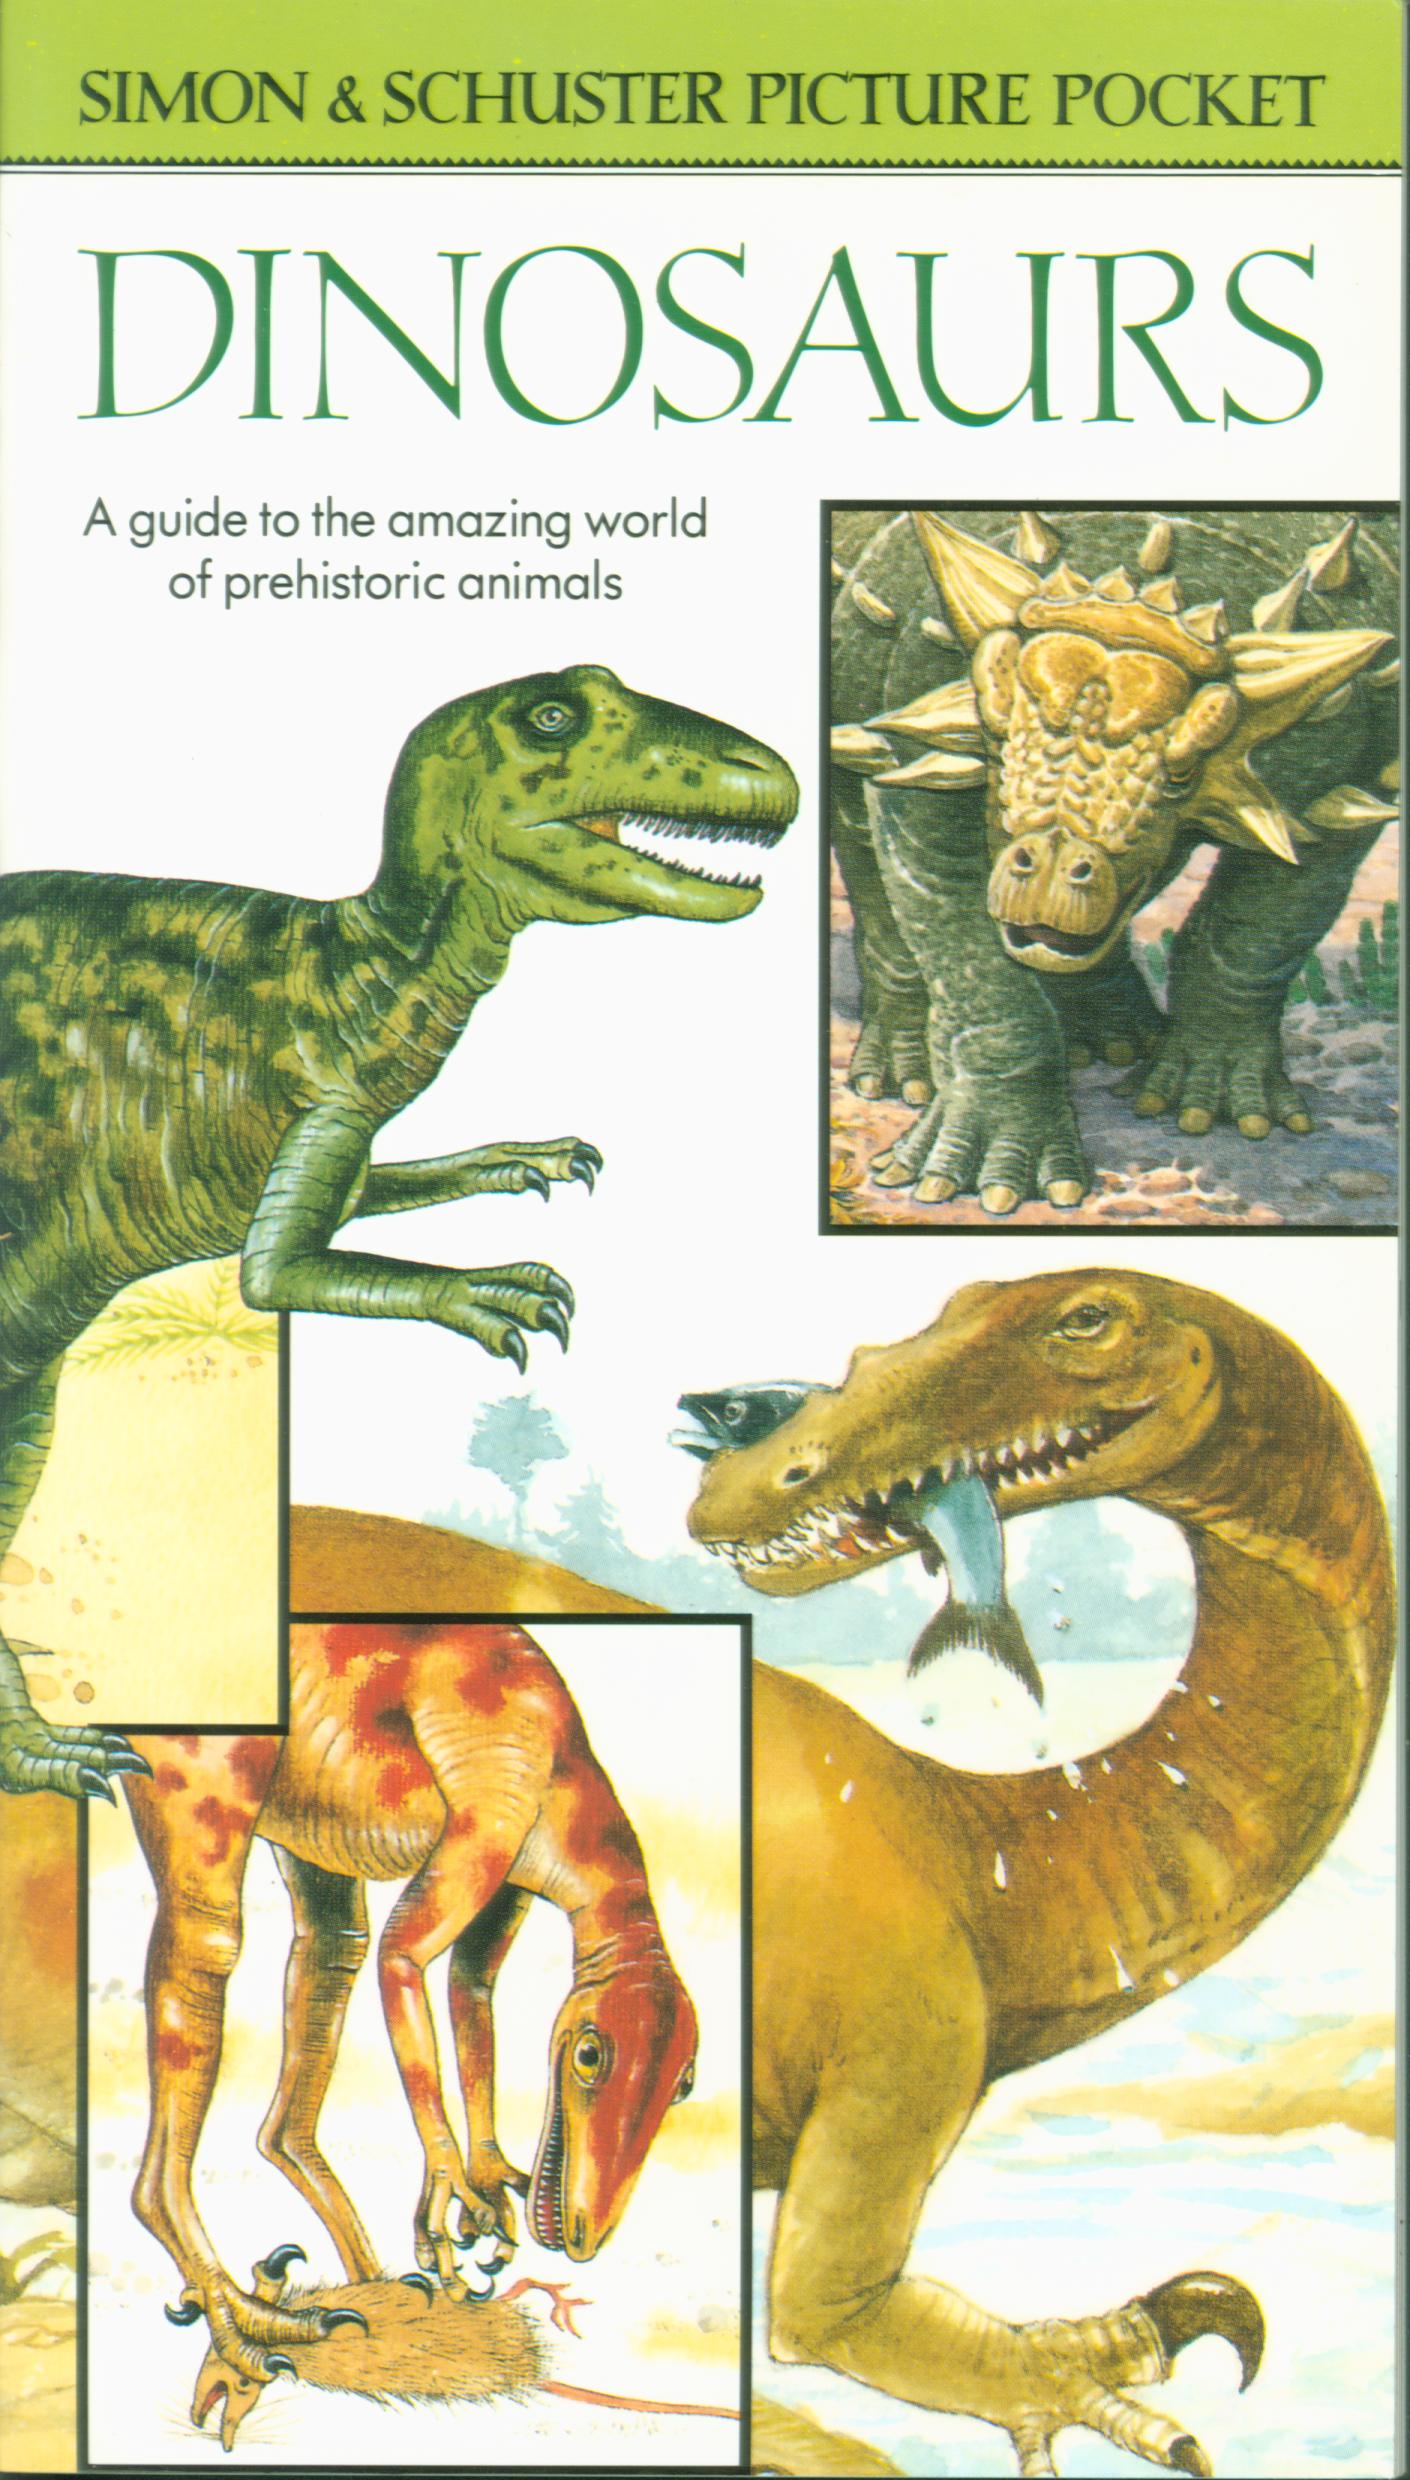 DINOSAURS: a guide to the amazing world of prehistoric animals. (Simon & Schuster Picture Pocket). 